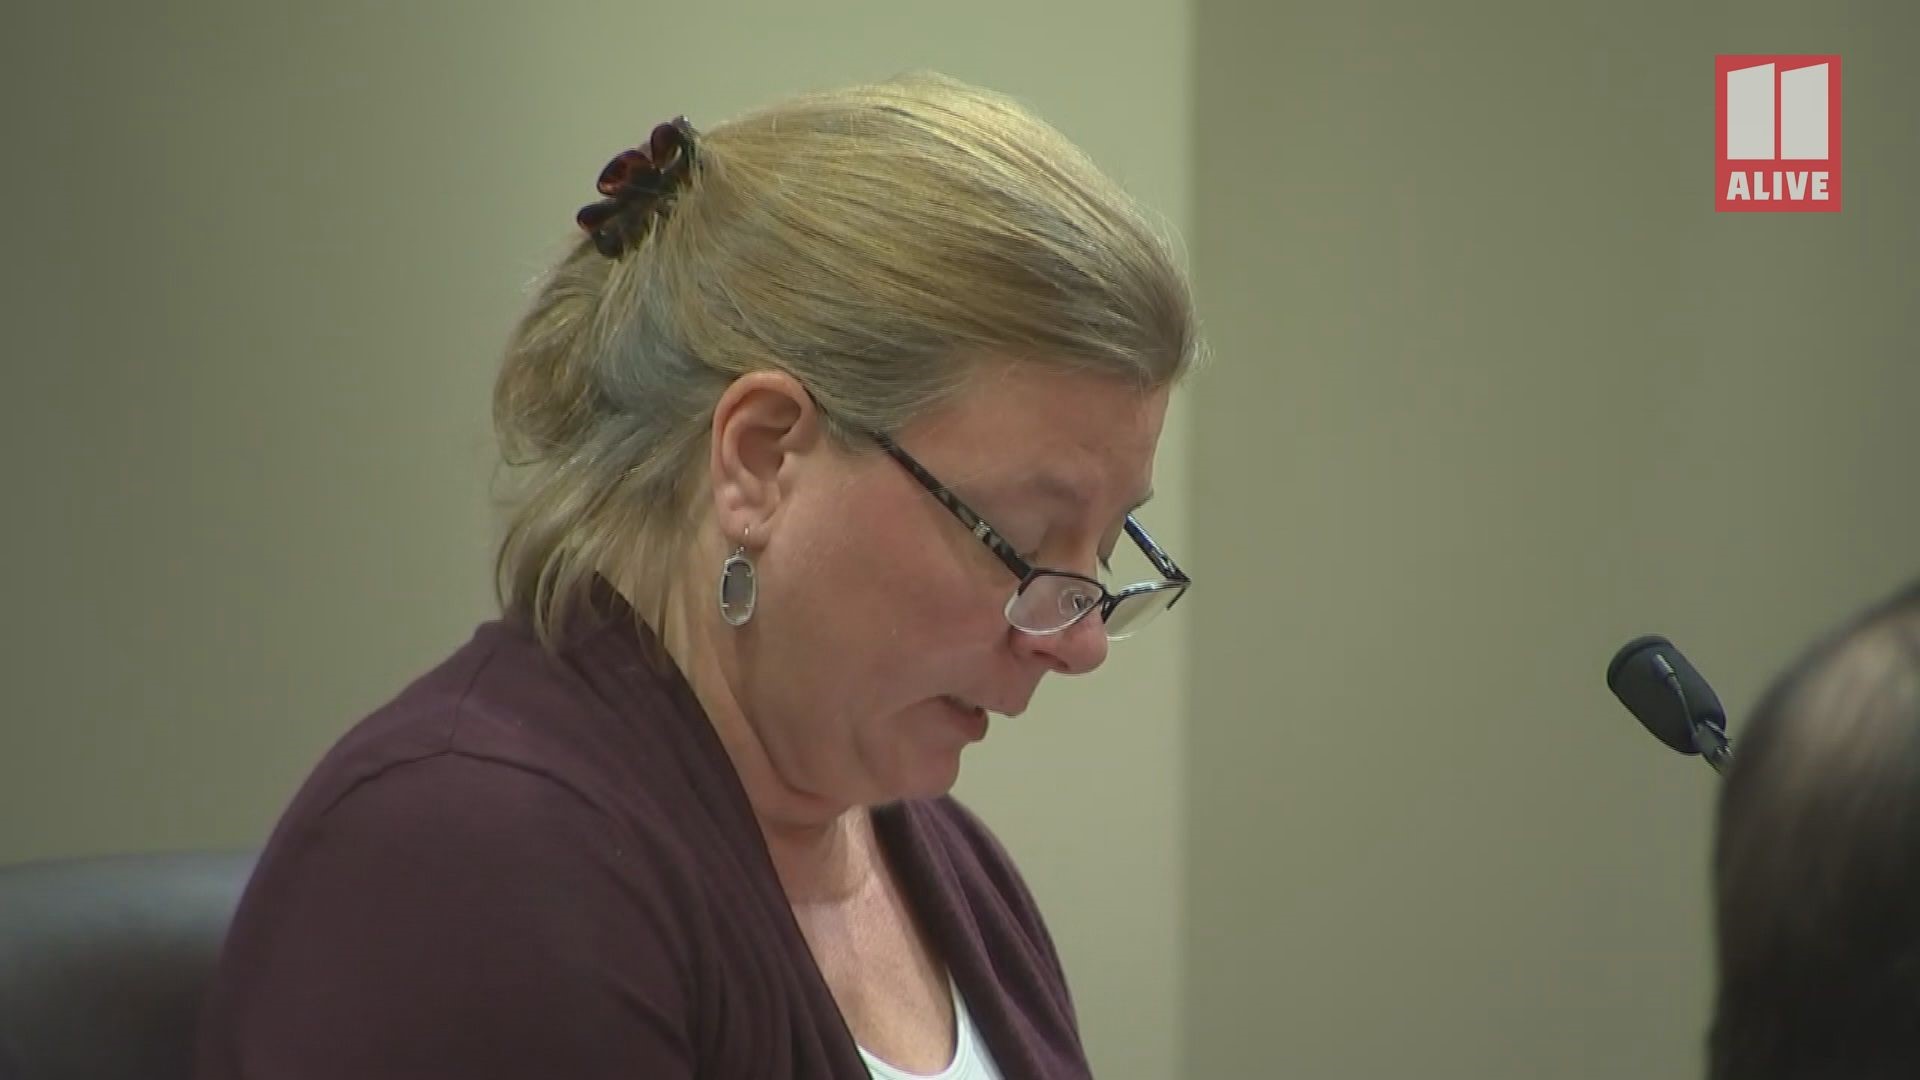 Katherine Olsen gave a statement before the judge sentenced her husband, Robert Olsen. He was was convicted on four charges connected to Anthony Hill's death.